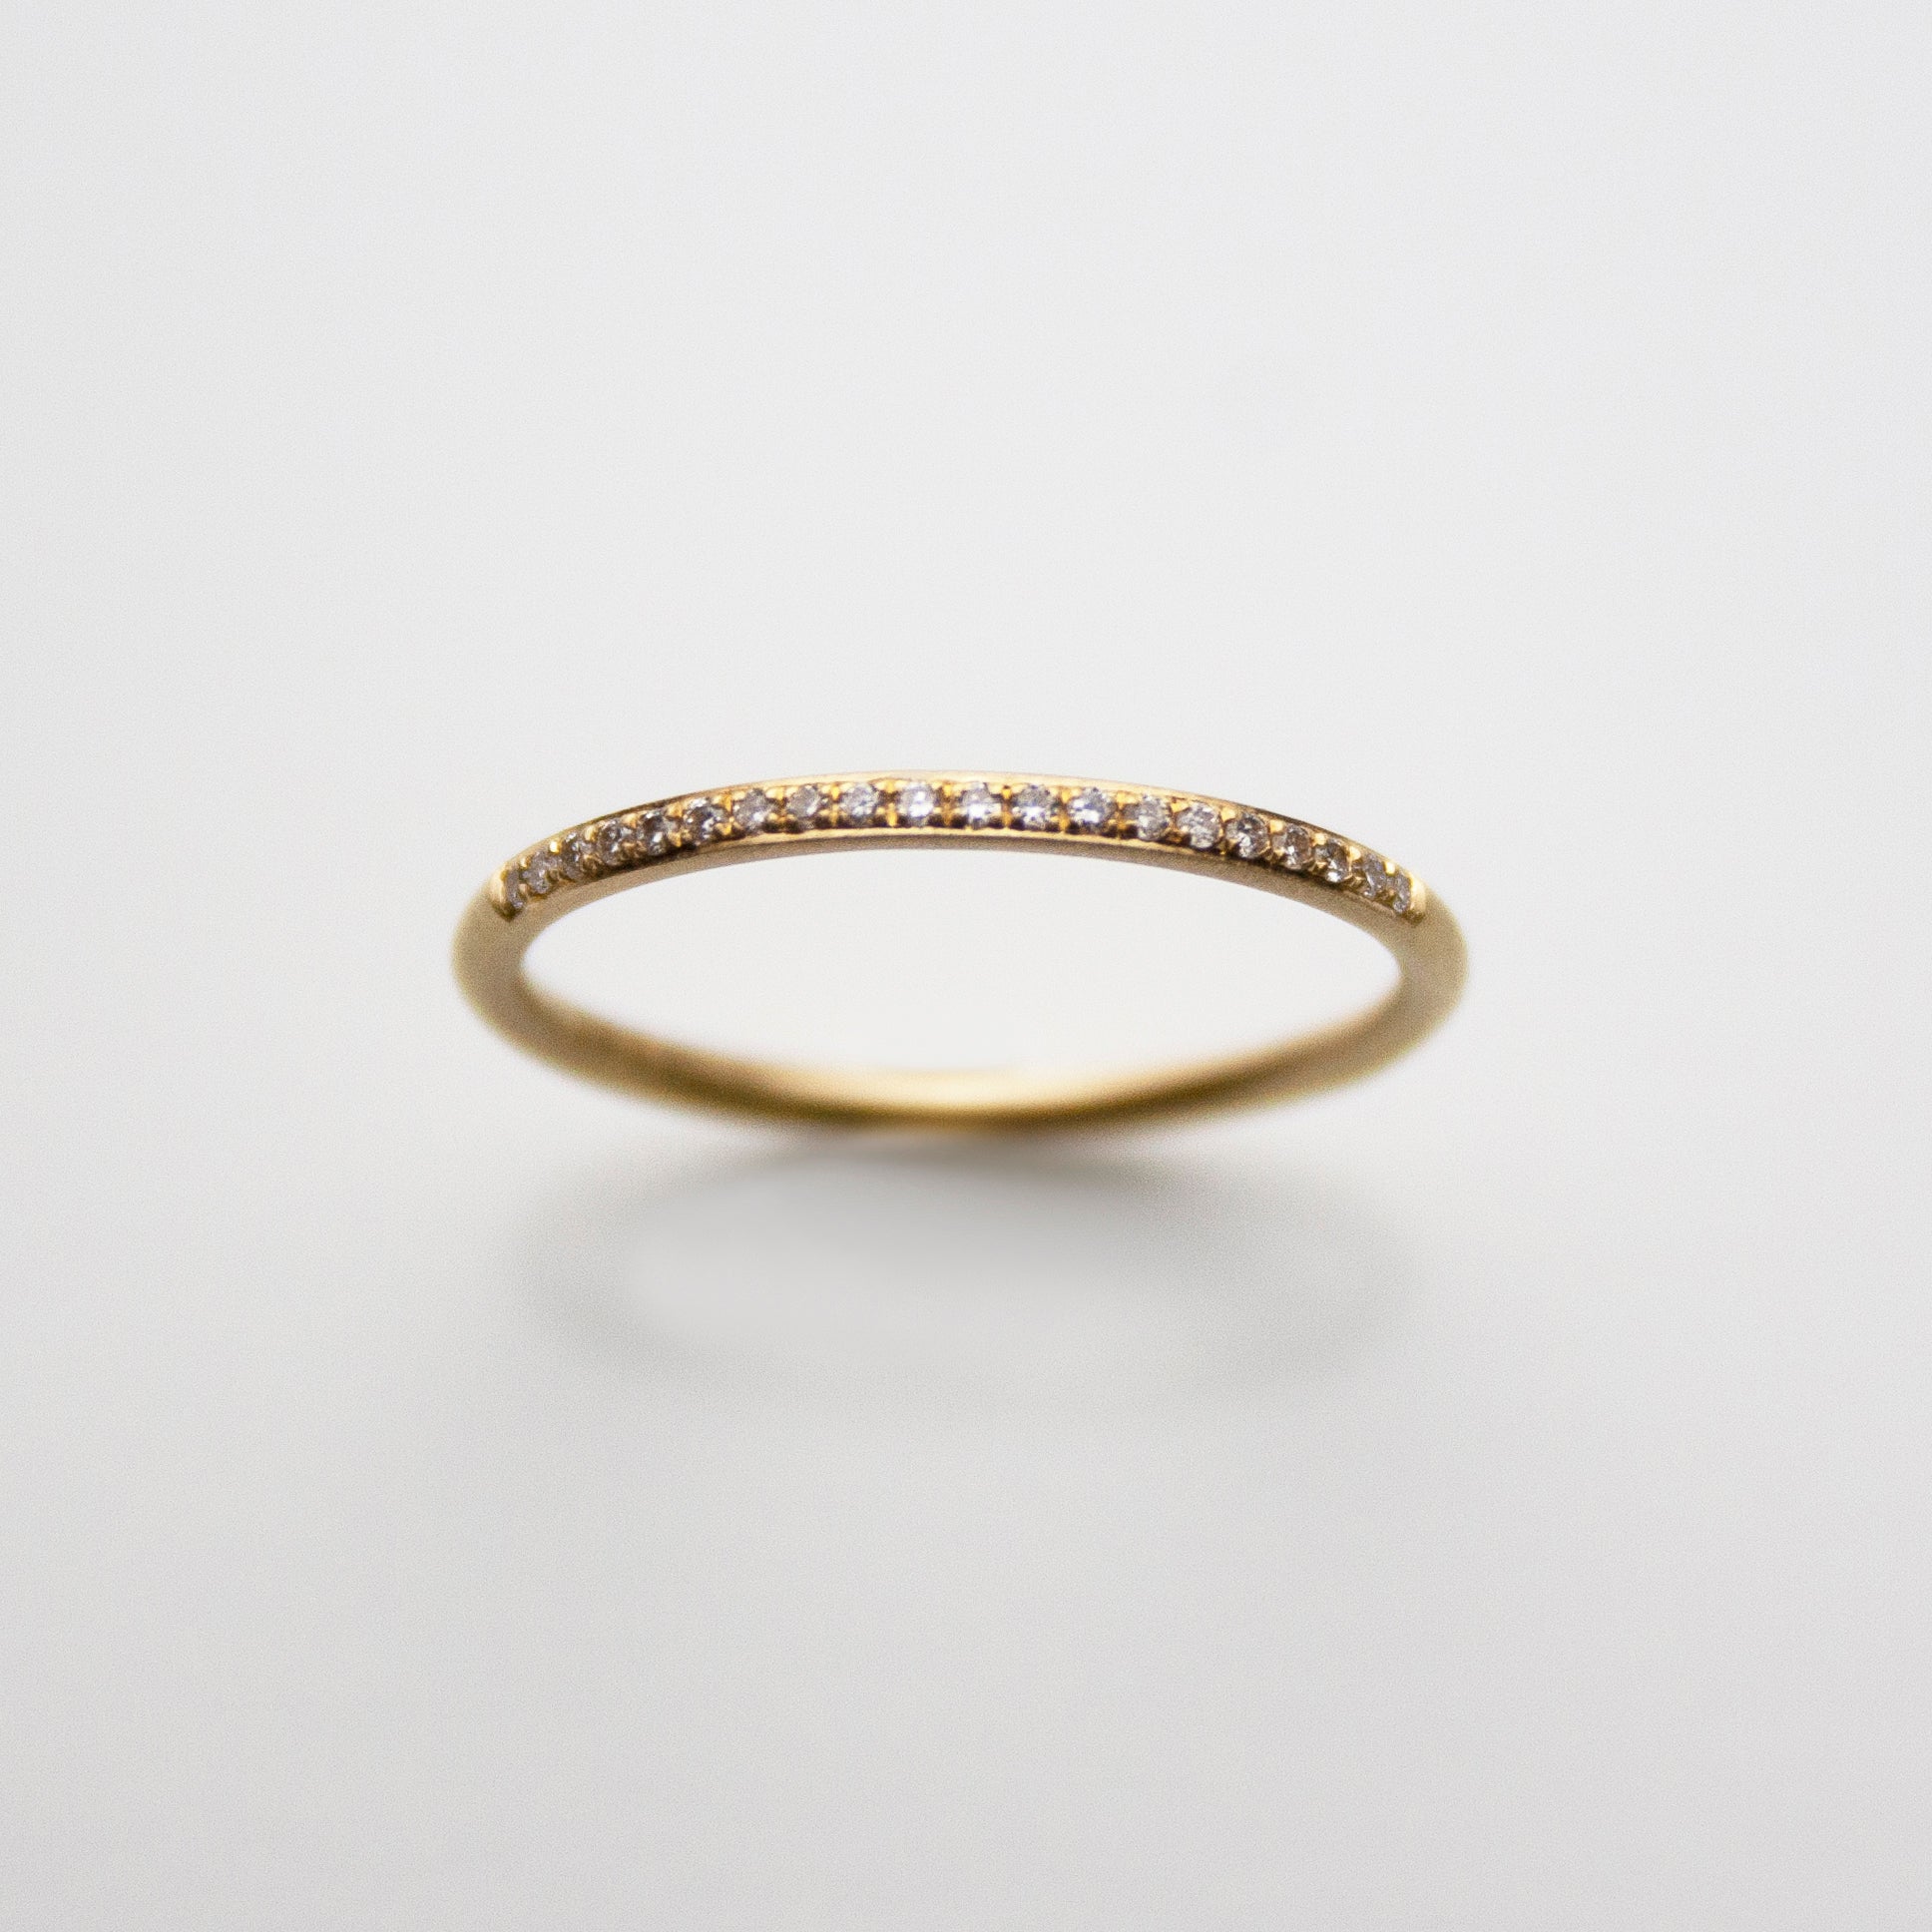 Fine 18ct. Gold and Diamond Band